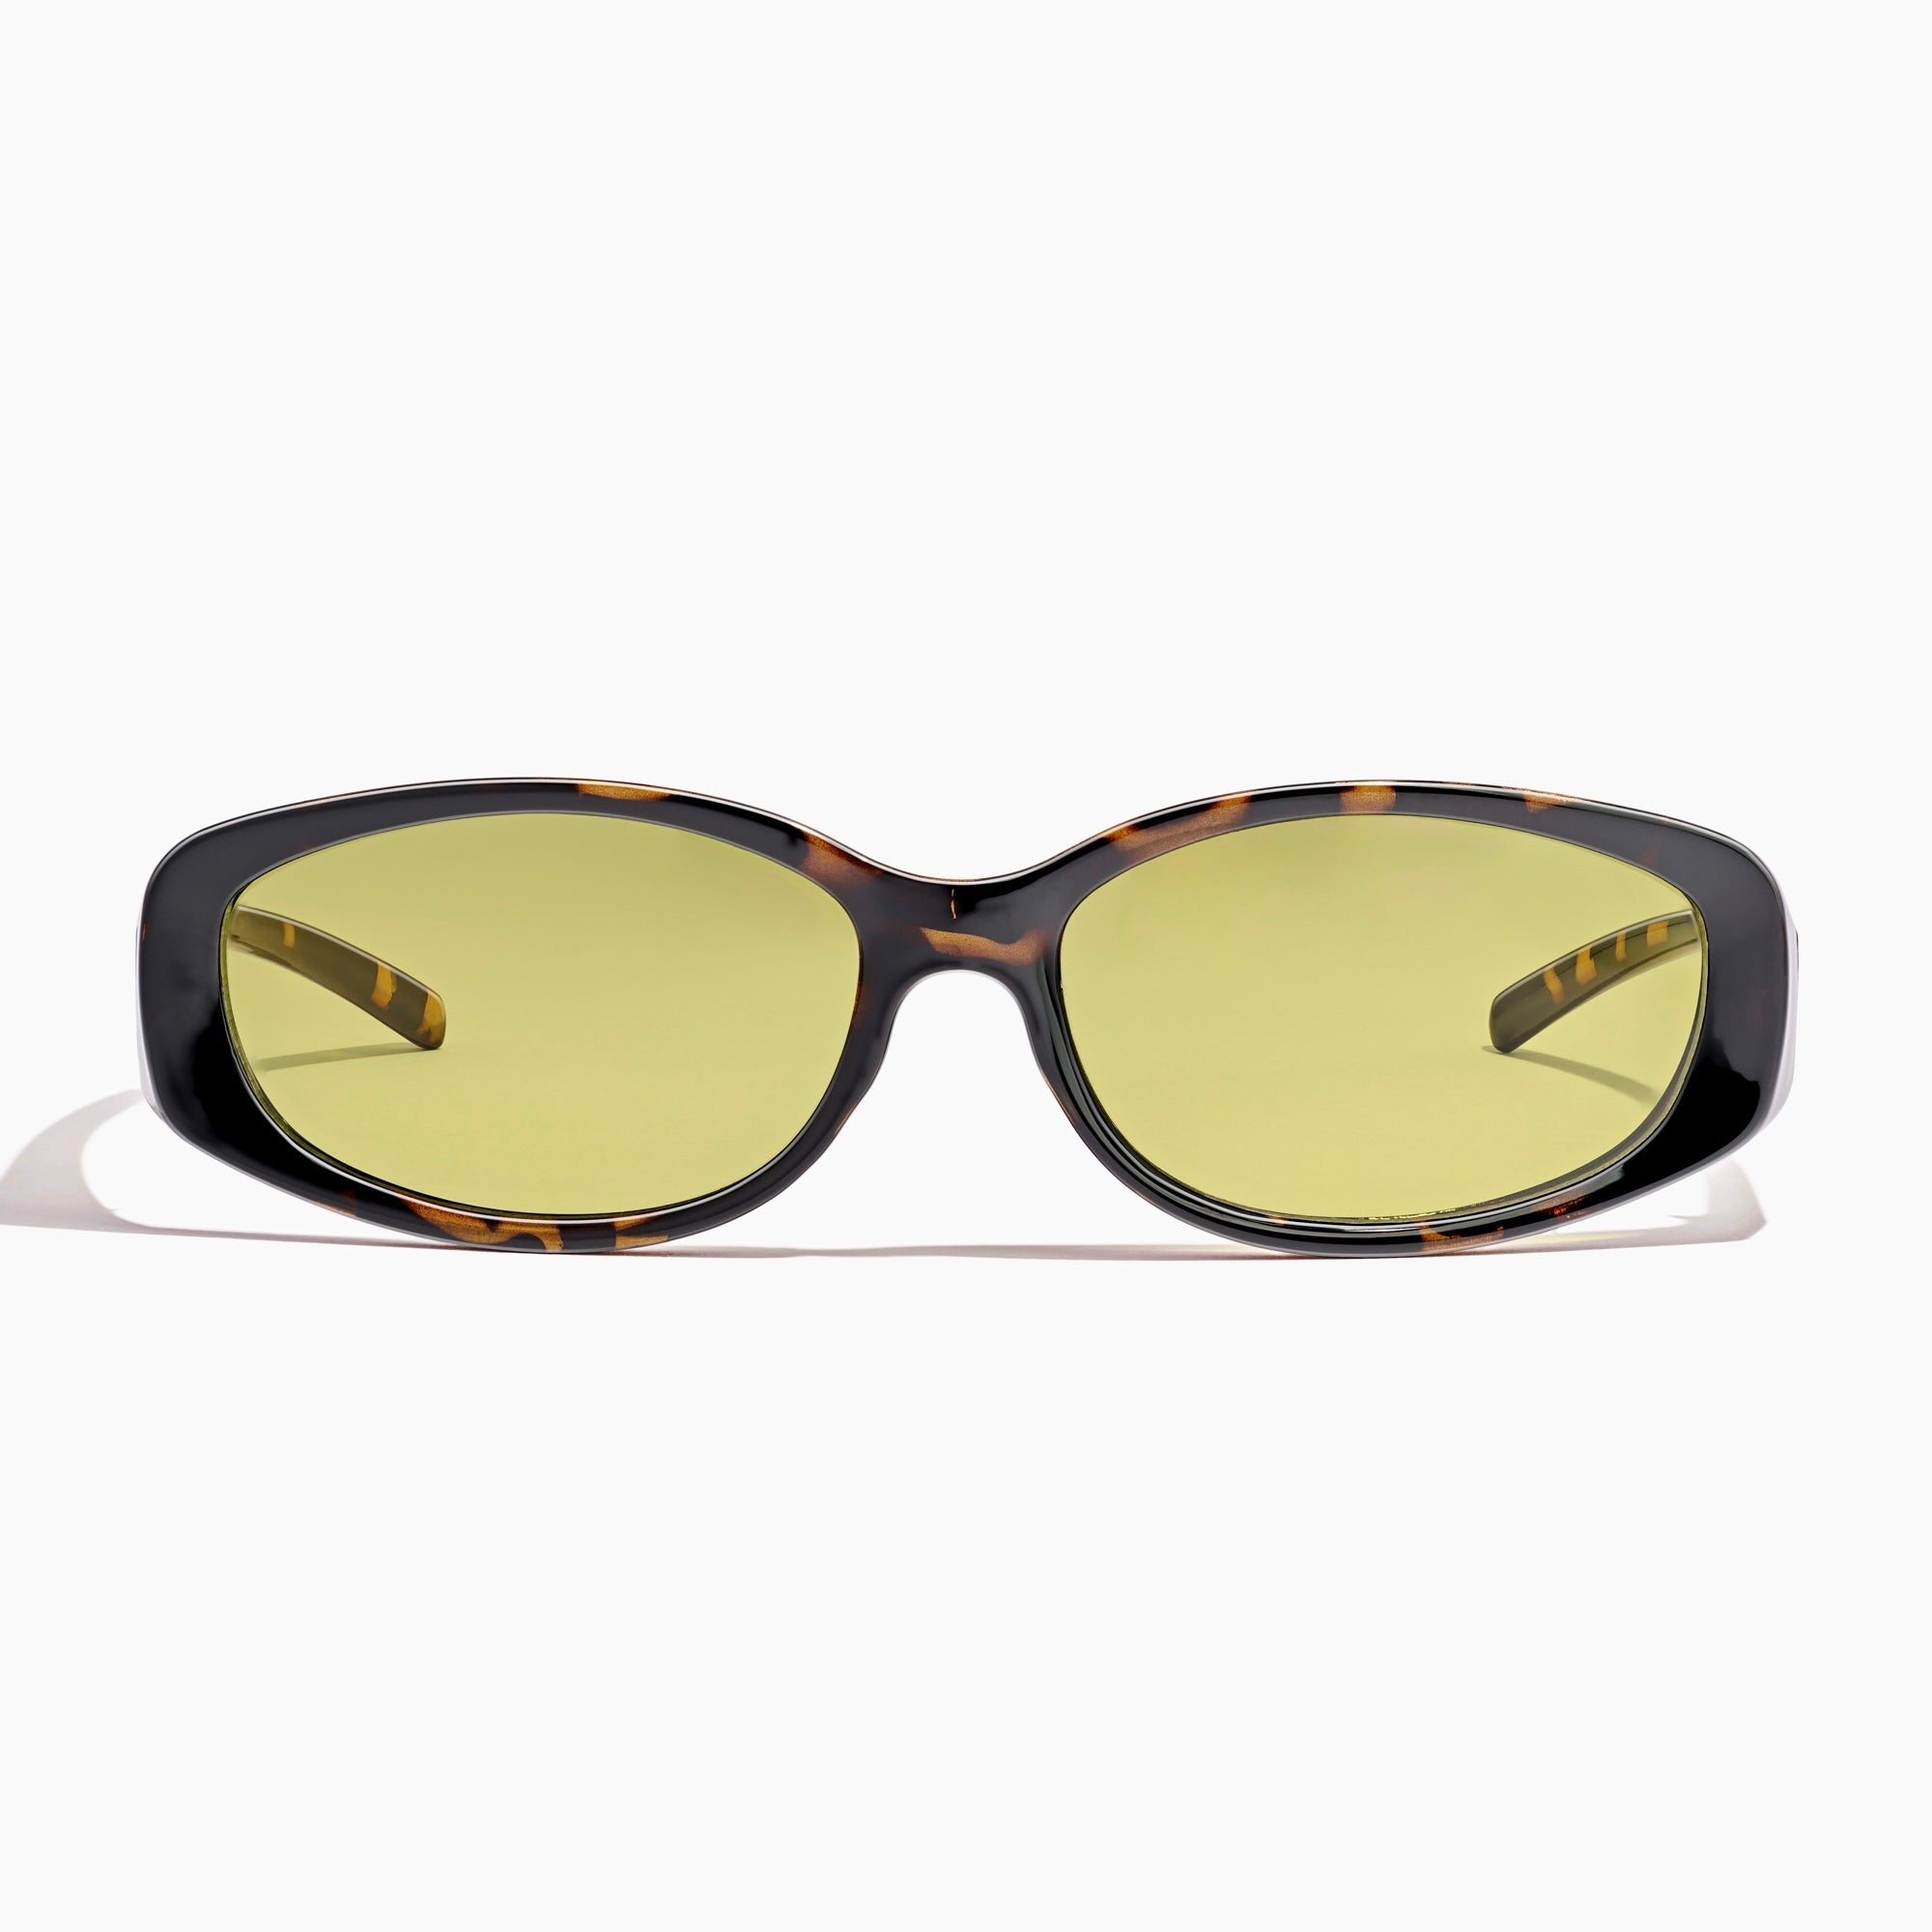 After Dark Sunglasses in tortoise and caper - Szade - State Of Flux